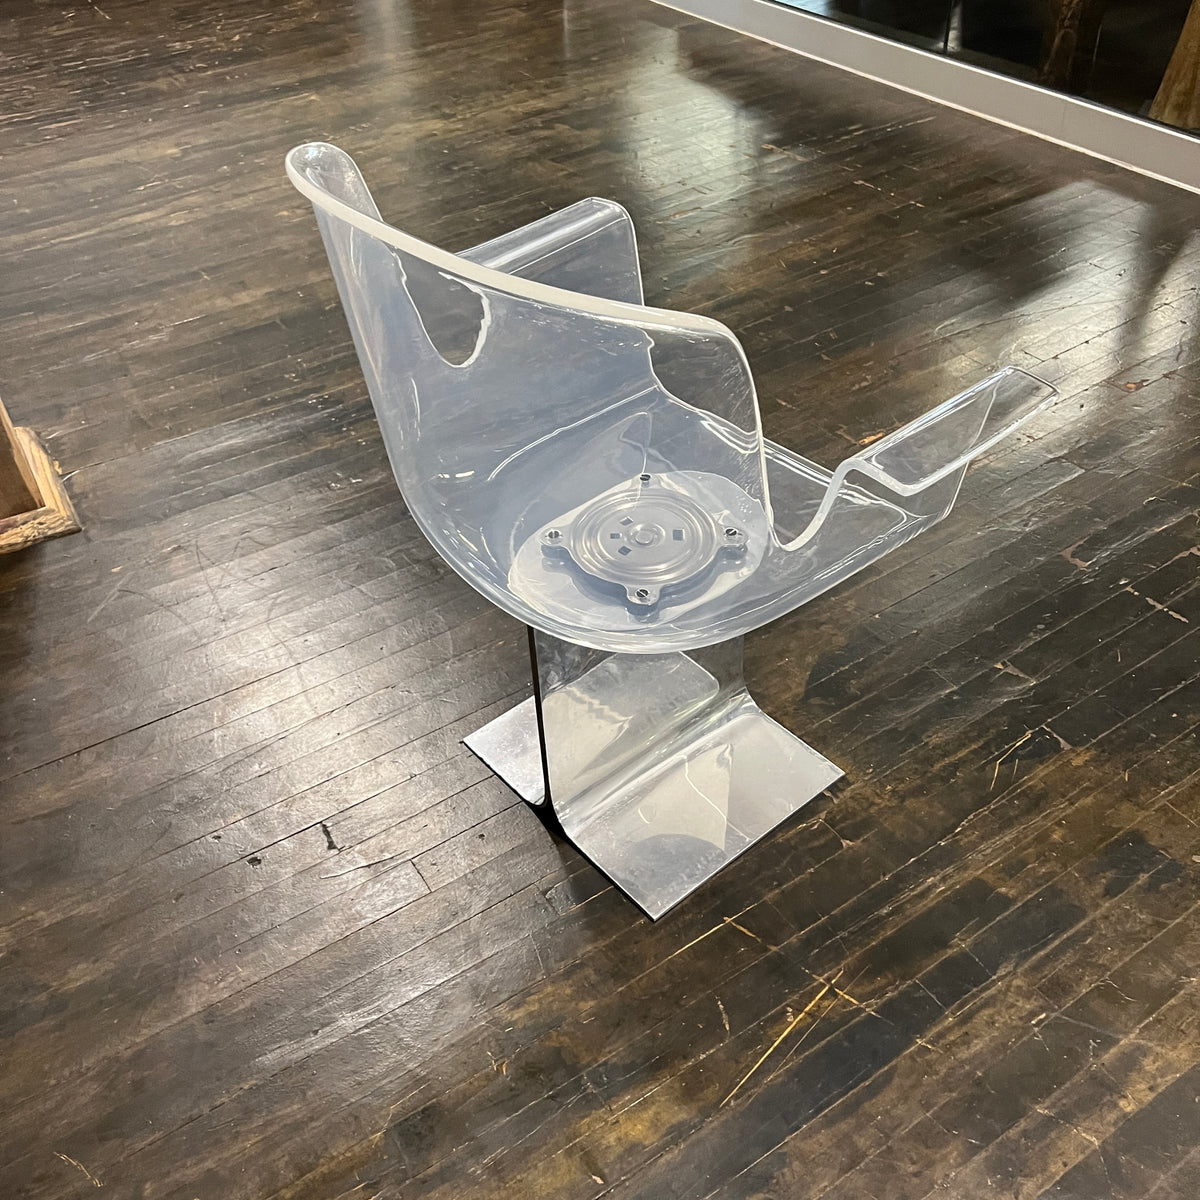 Sculptural lucite swivel chair by Pace Collection circa 1970.  Chair model No. 171 